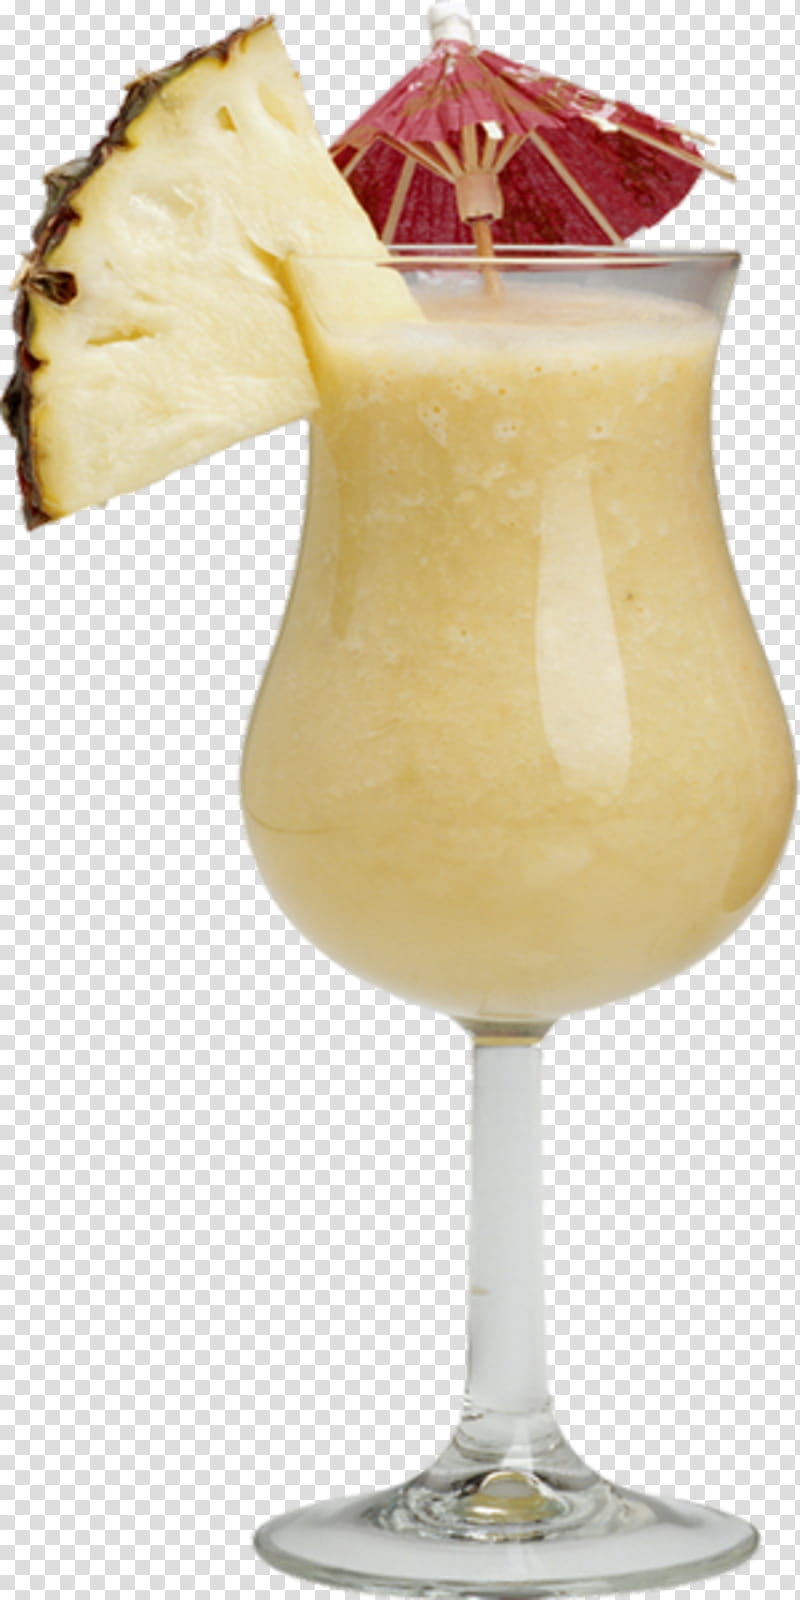 Pineapple, Cocktail, Drink, Cocktail Garnish, Mai Tai, Juice, Daiquiri, Smoothie transparent background PNG clipart